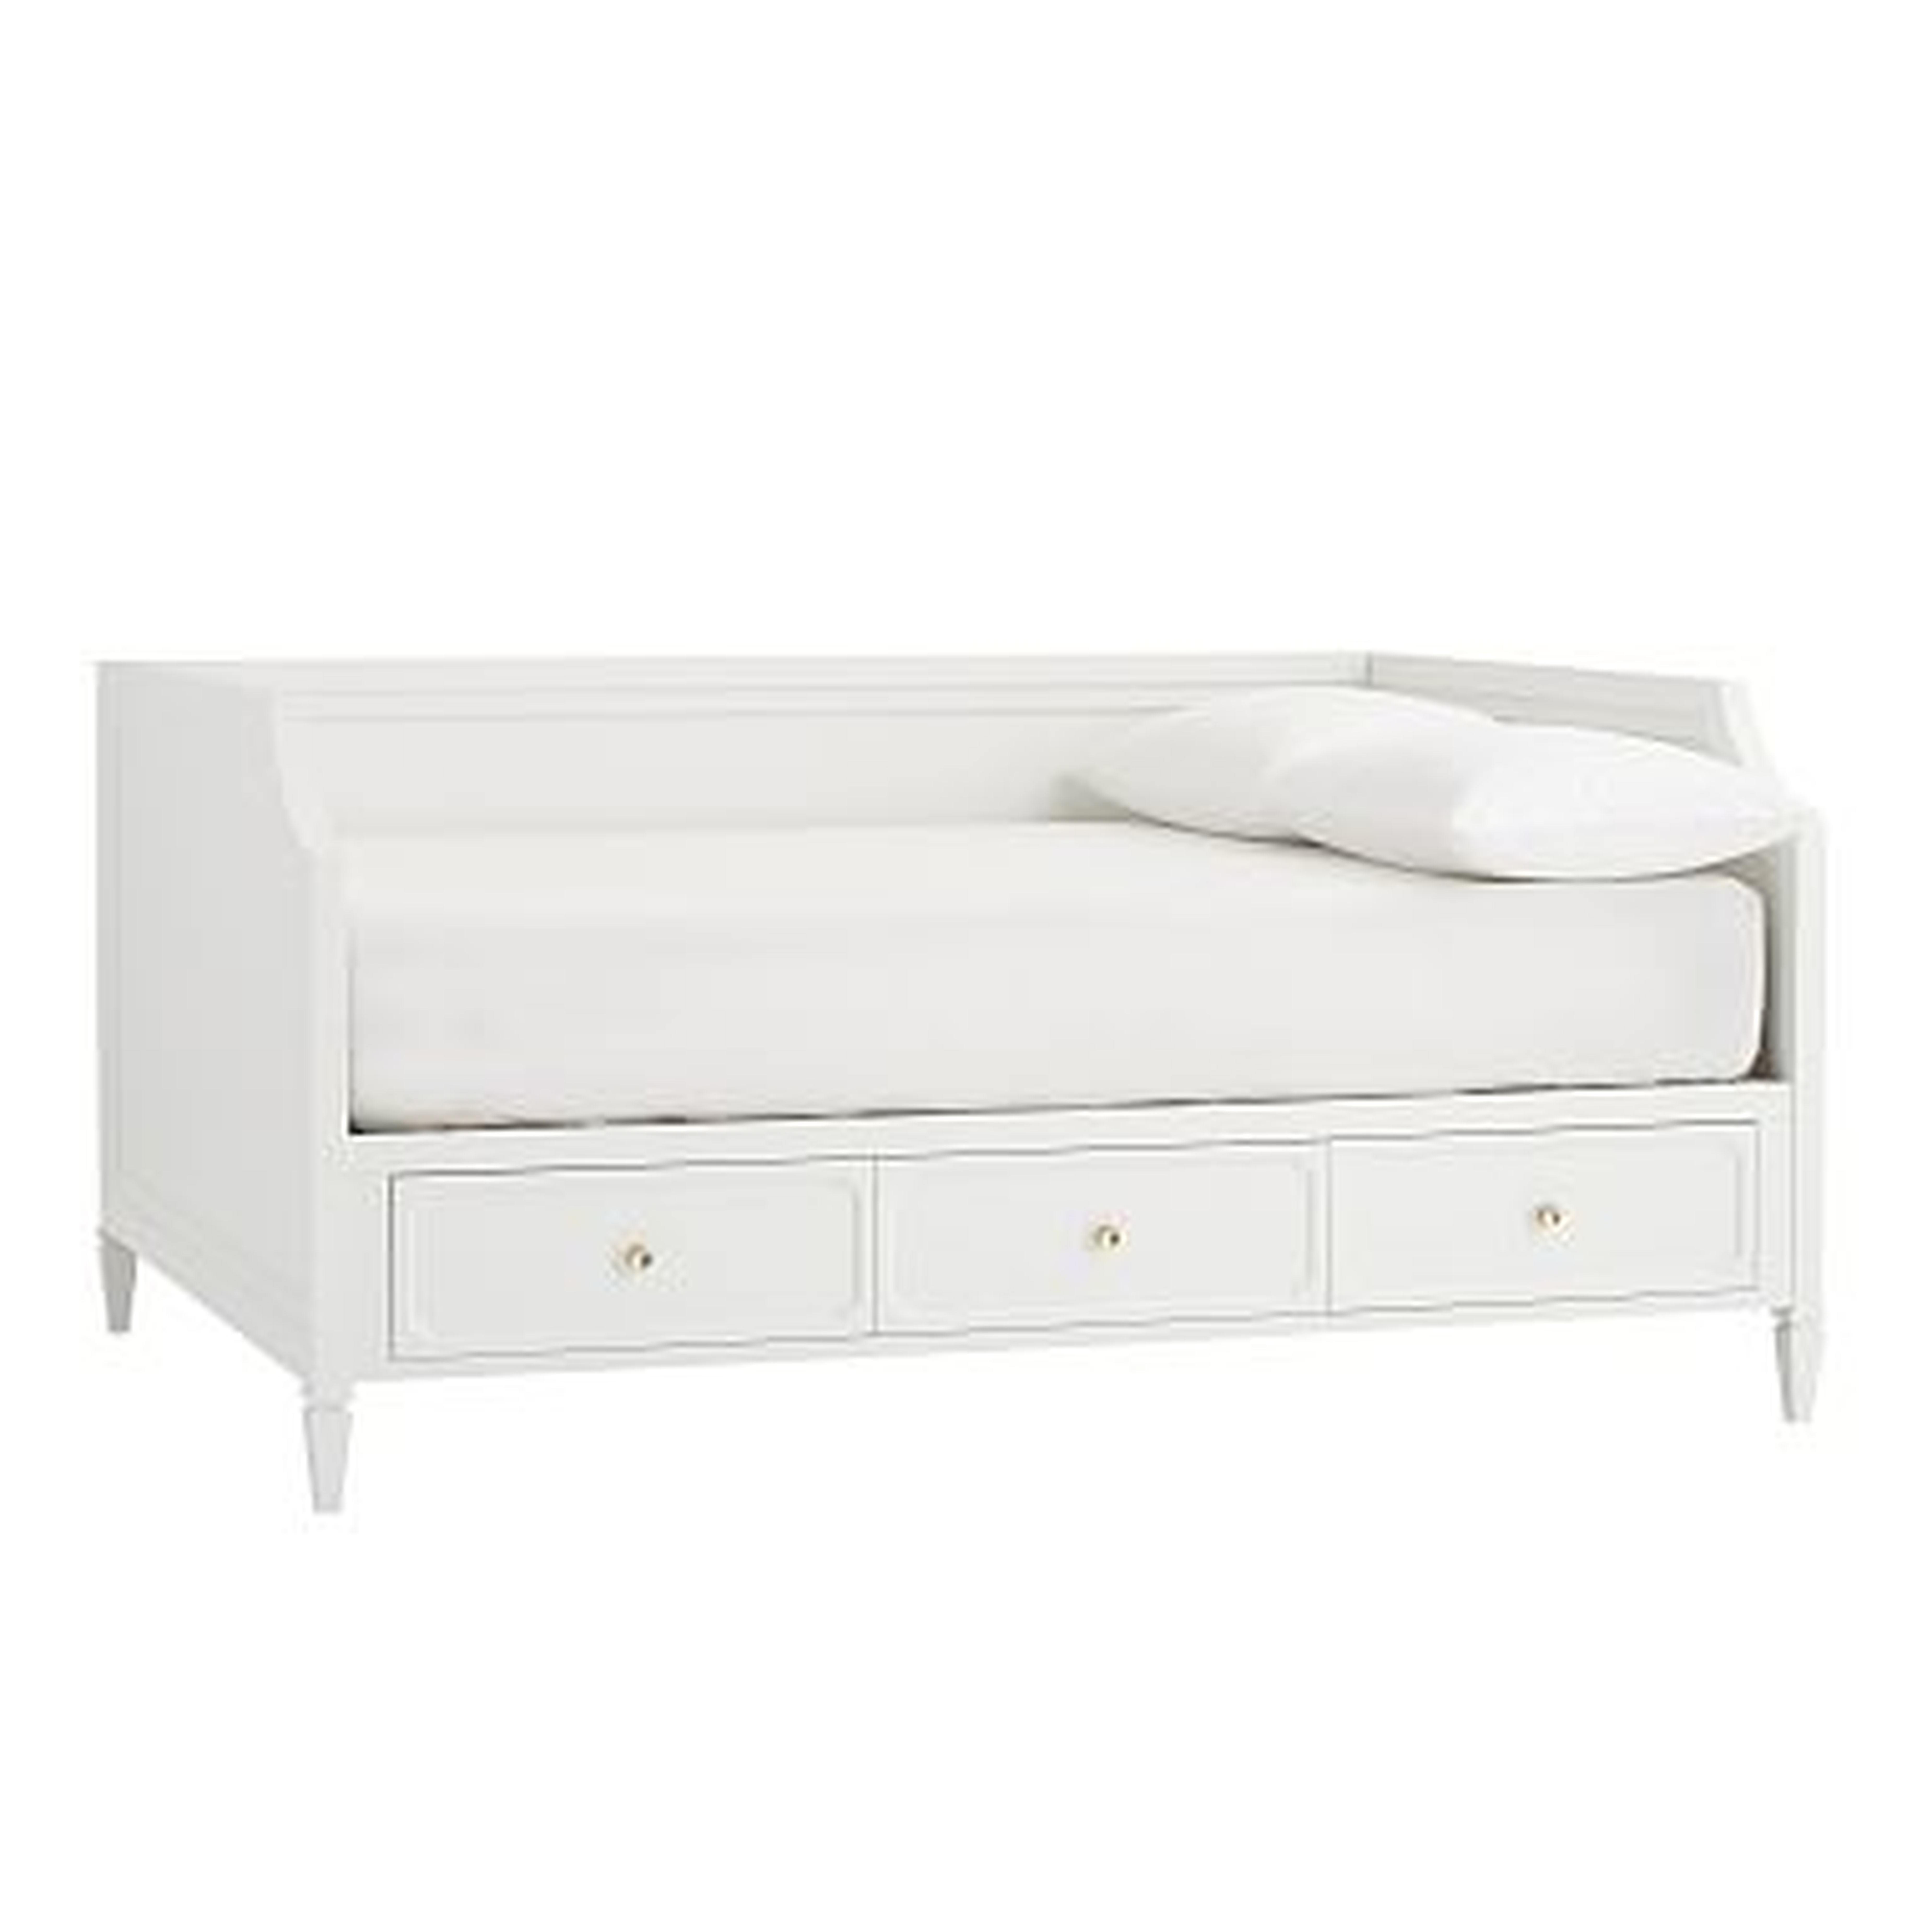 Auburn Storage Daybed, Full, Simply White - Pottery Barn Teen